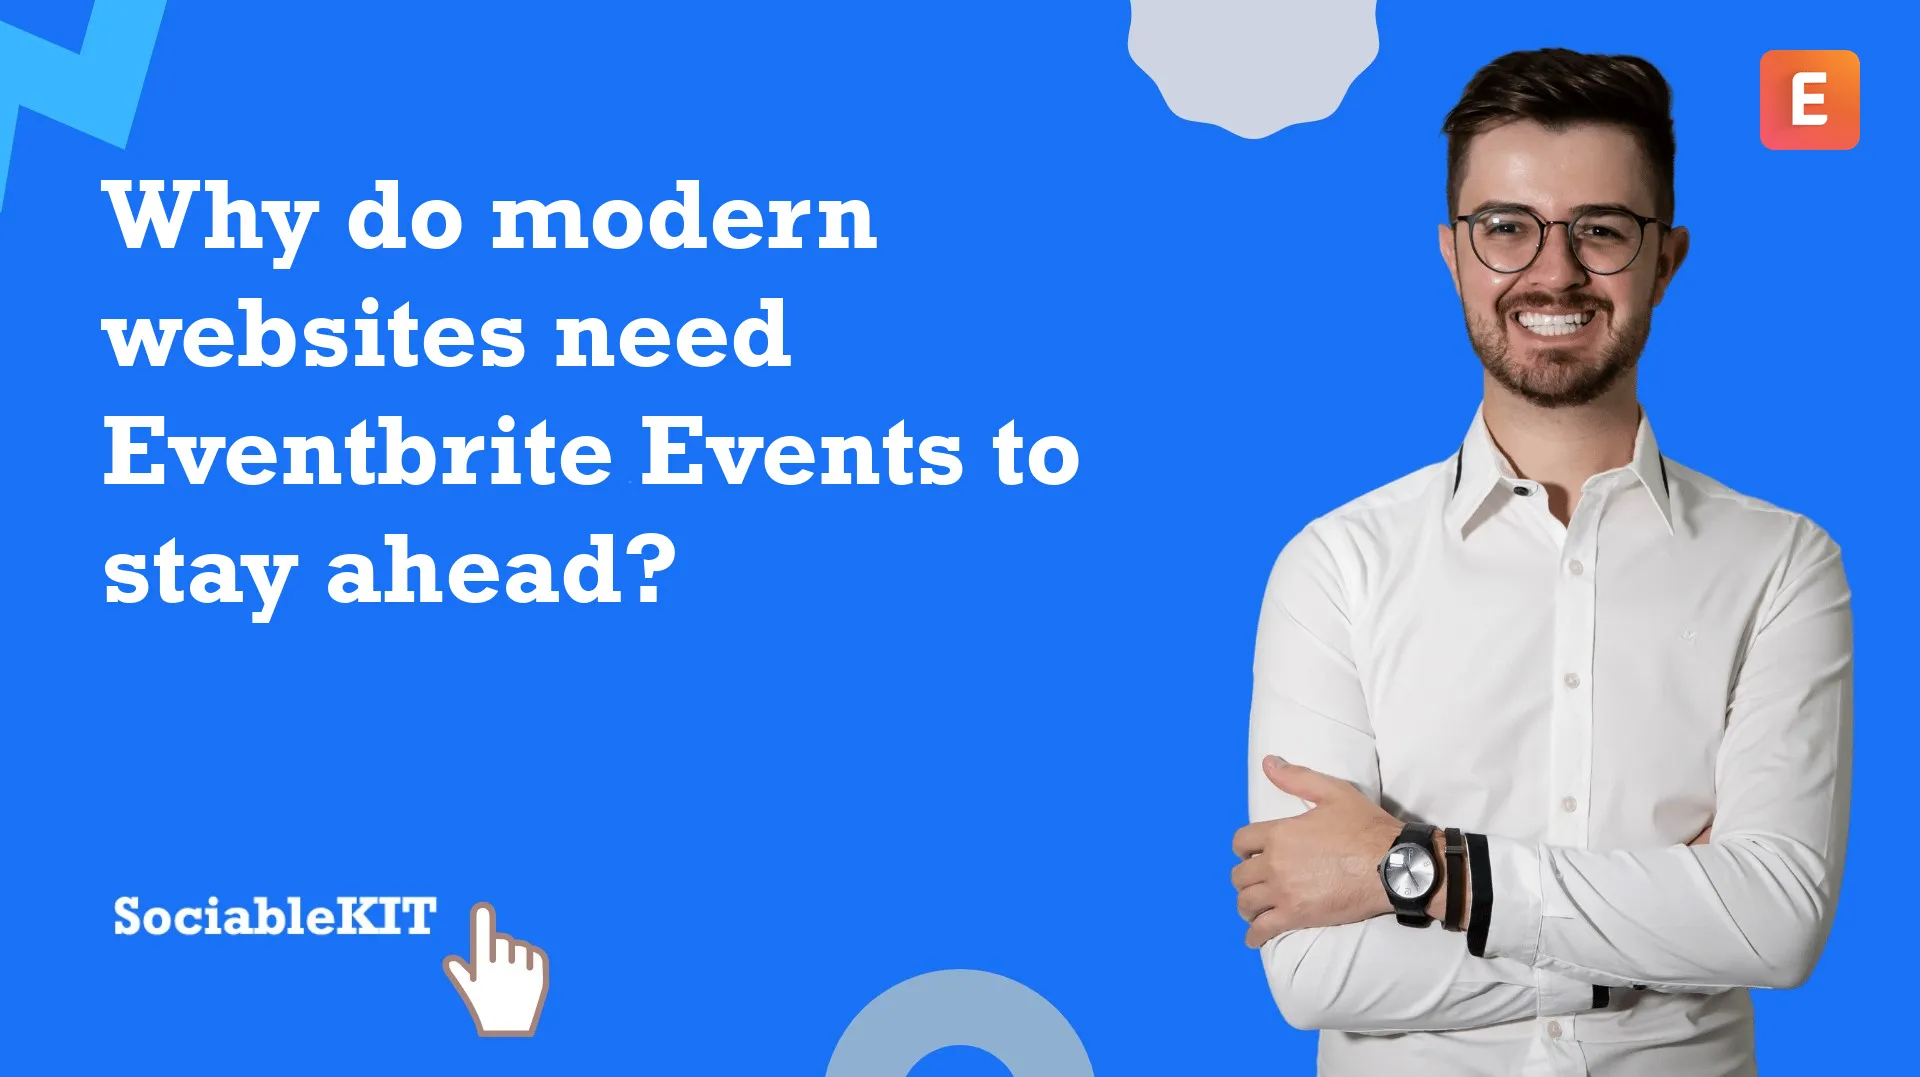 Why do modern websites need Eventbrite Events to stay ahead?